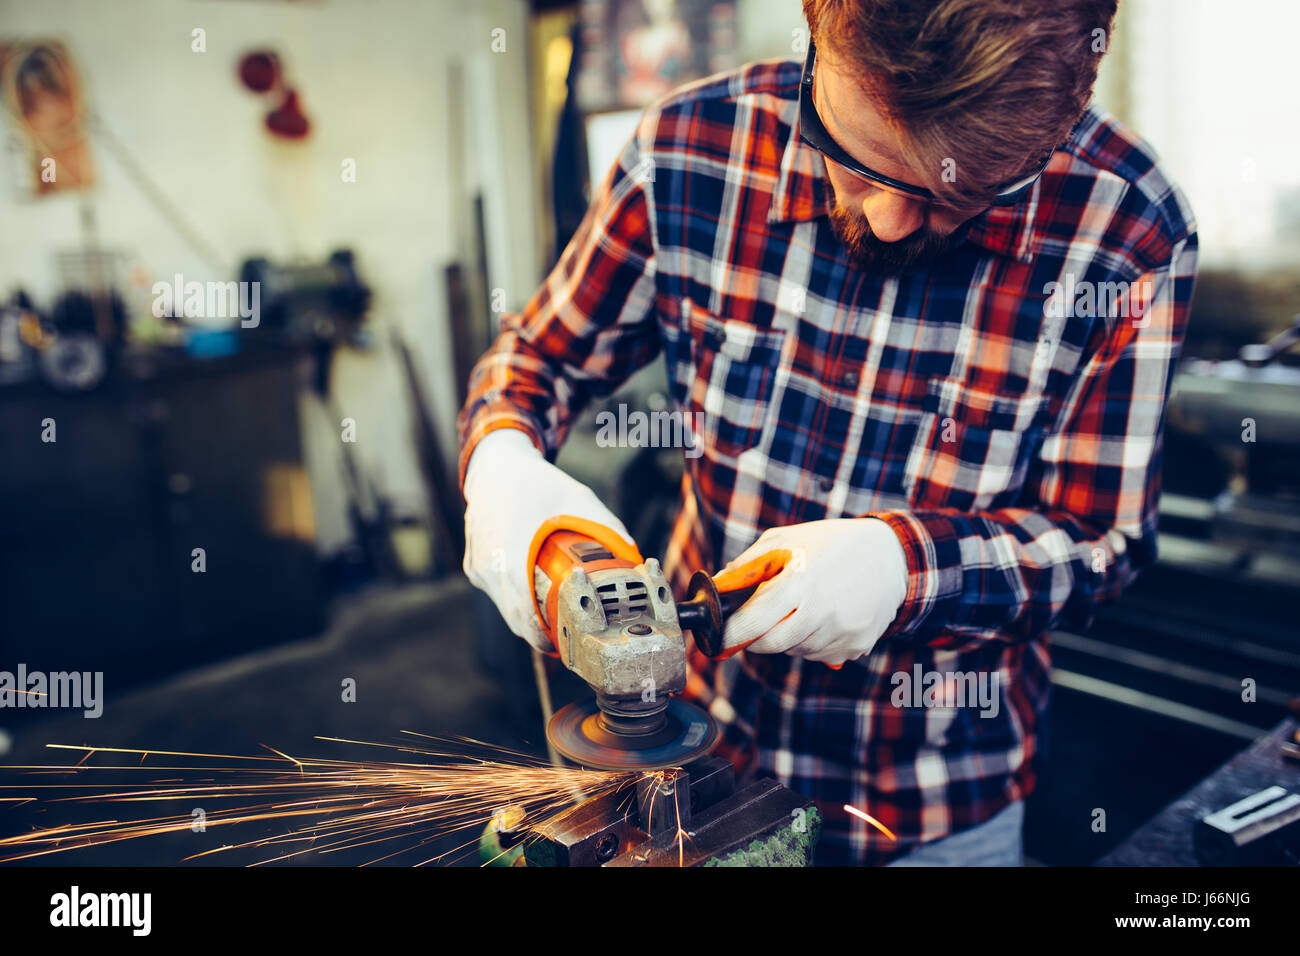 Young manual worker working with grinder Stock Photo